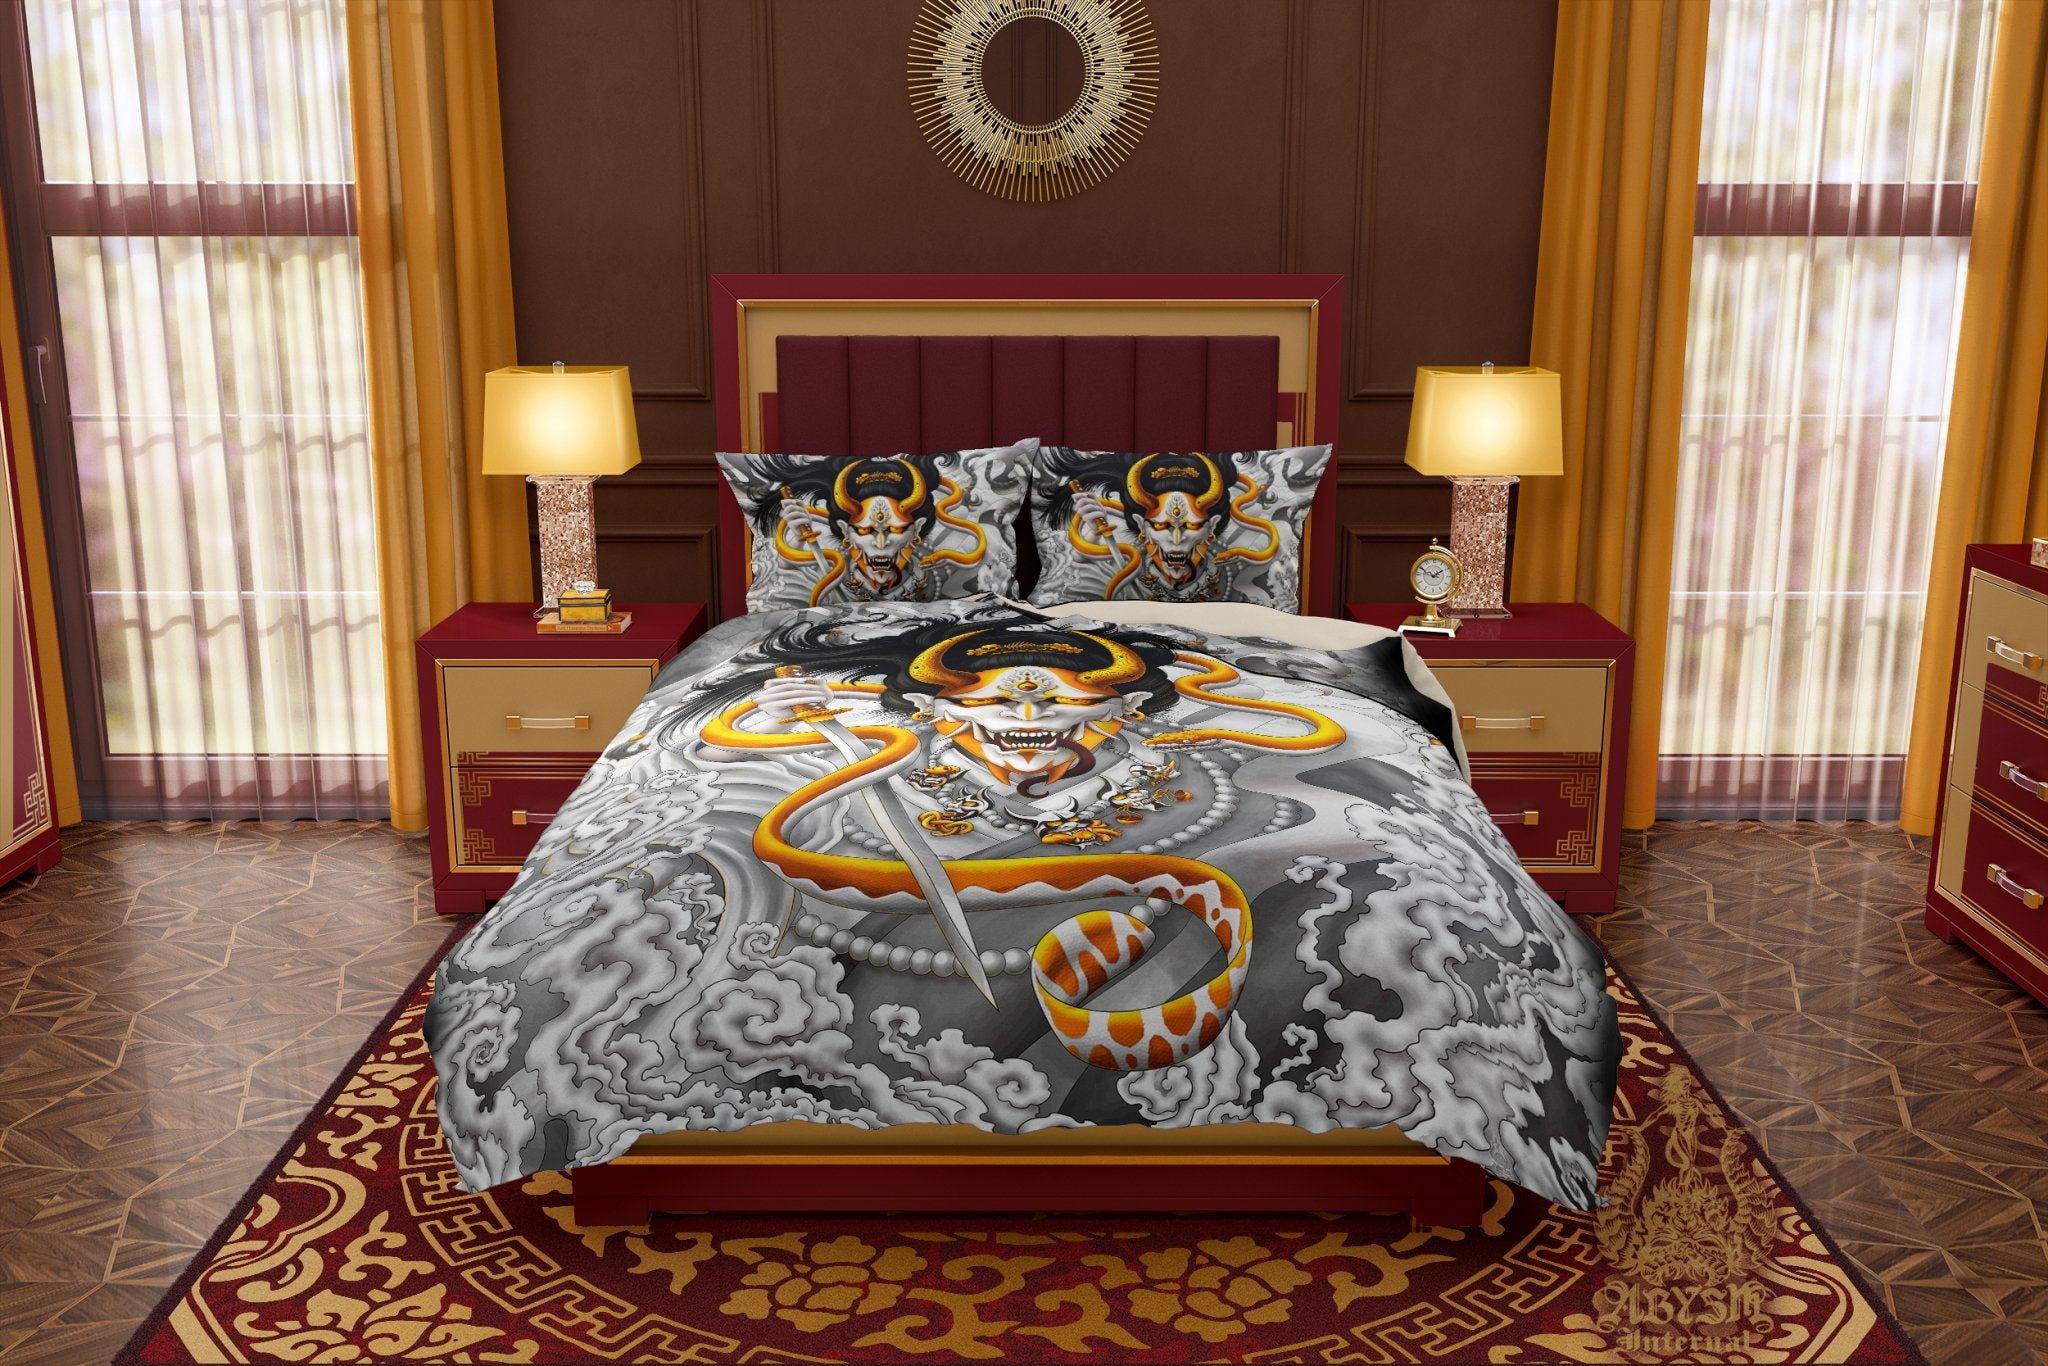 Japanese Demon Bedding Set, Comforter or Duvet, White and Gold Bed Cover, Anime Bedroom Decor, King, Queen & Twin Size - Snake and Hannya - Abysm Internal